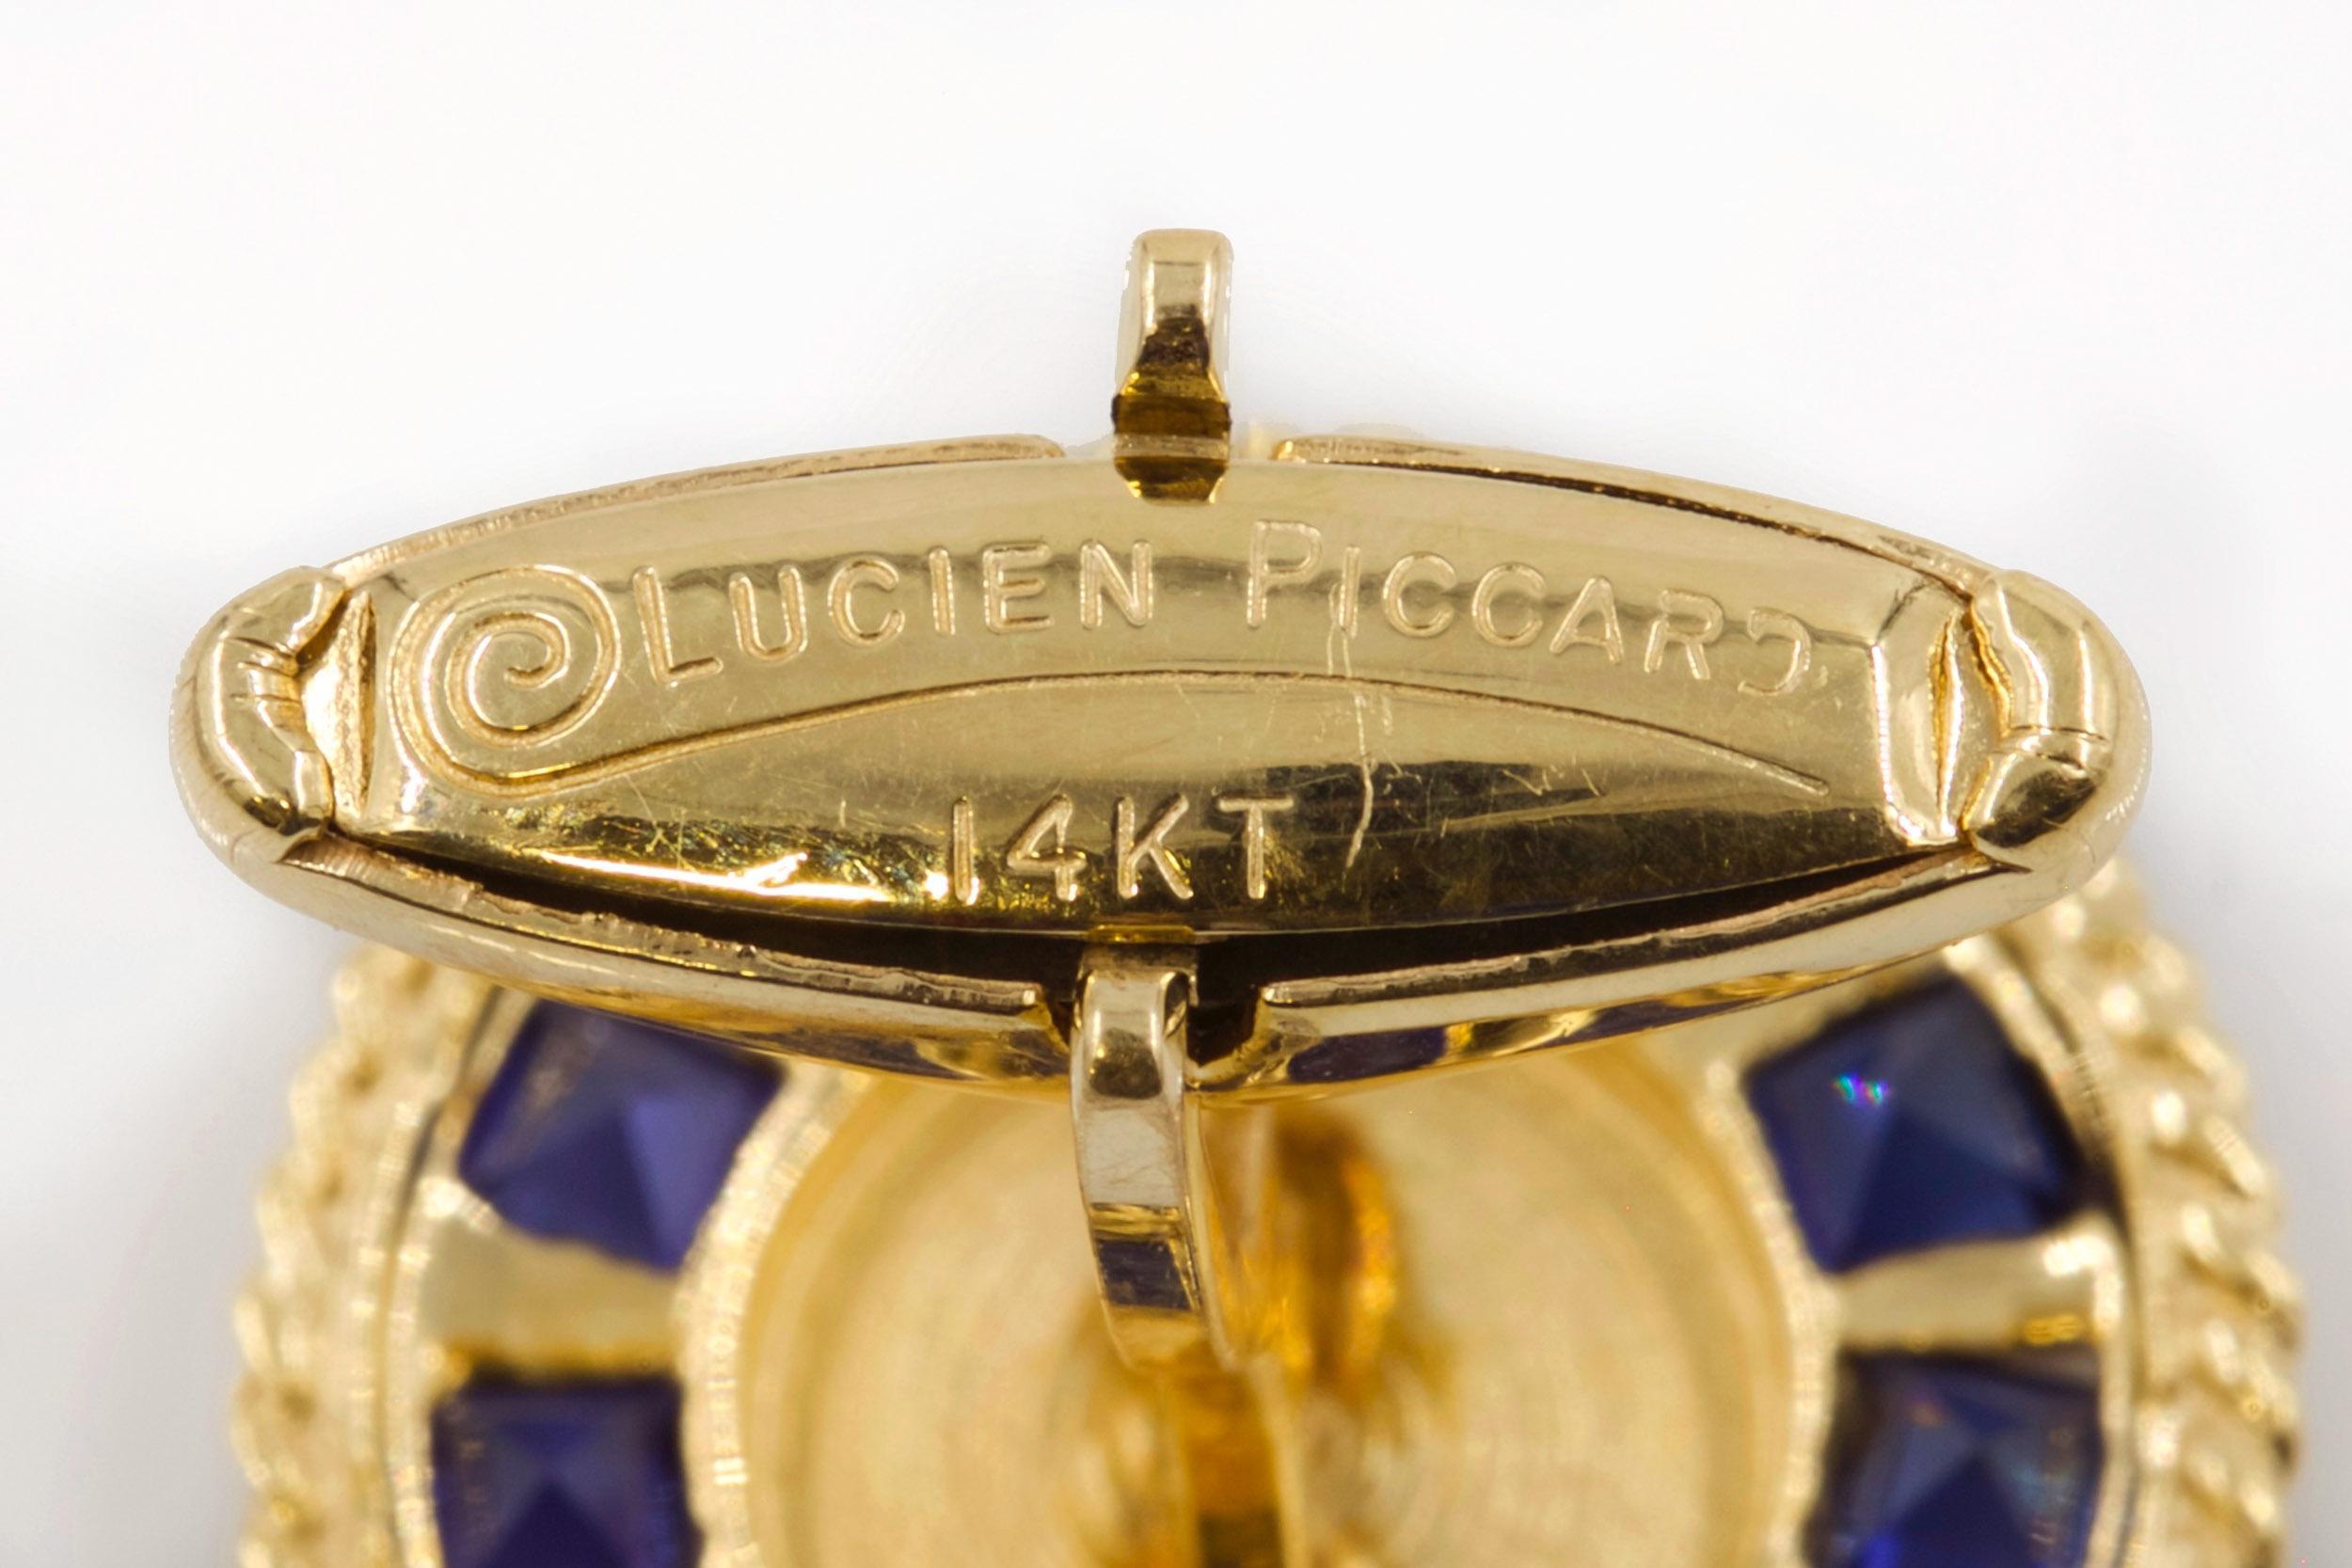 20th Century Pair of Modernist Brushed 14k Gold & Sapphire Cufflinks, Lucien Piccard, c. 1950